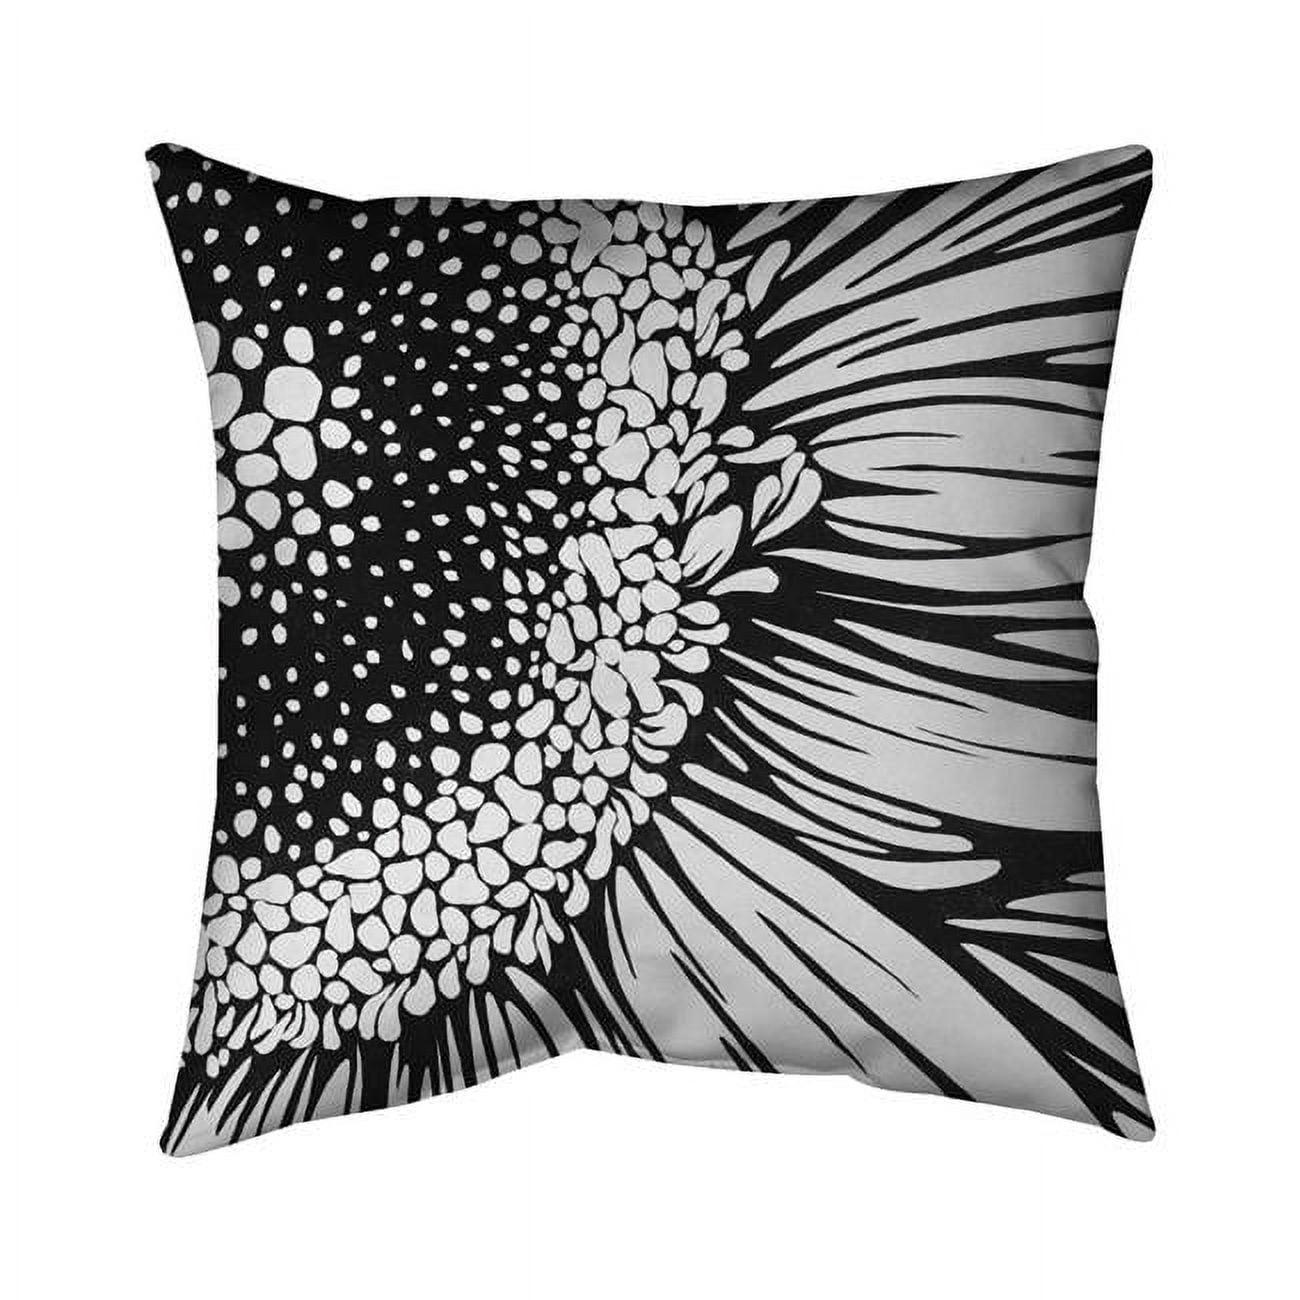 Begin Home Decor 5542-1818-FL123 18 x 18 in. Gerbera Flower-Double Sided Print Outdoor Pillow Cover